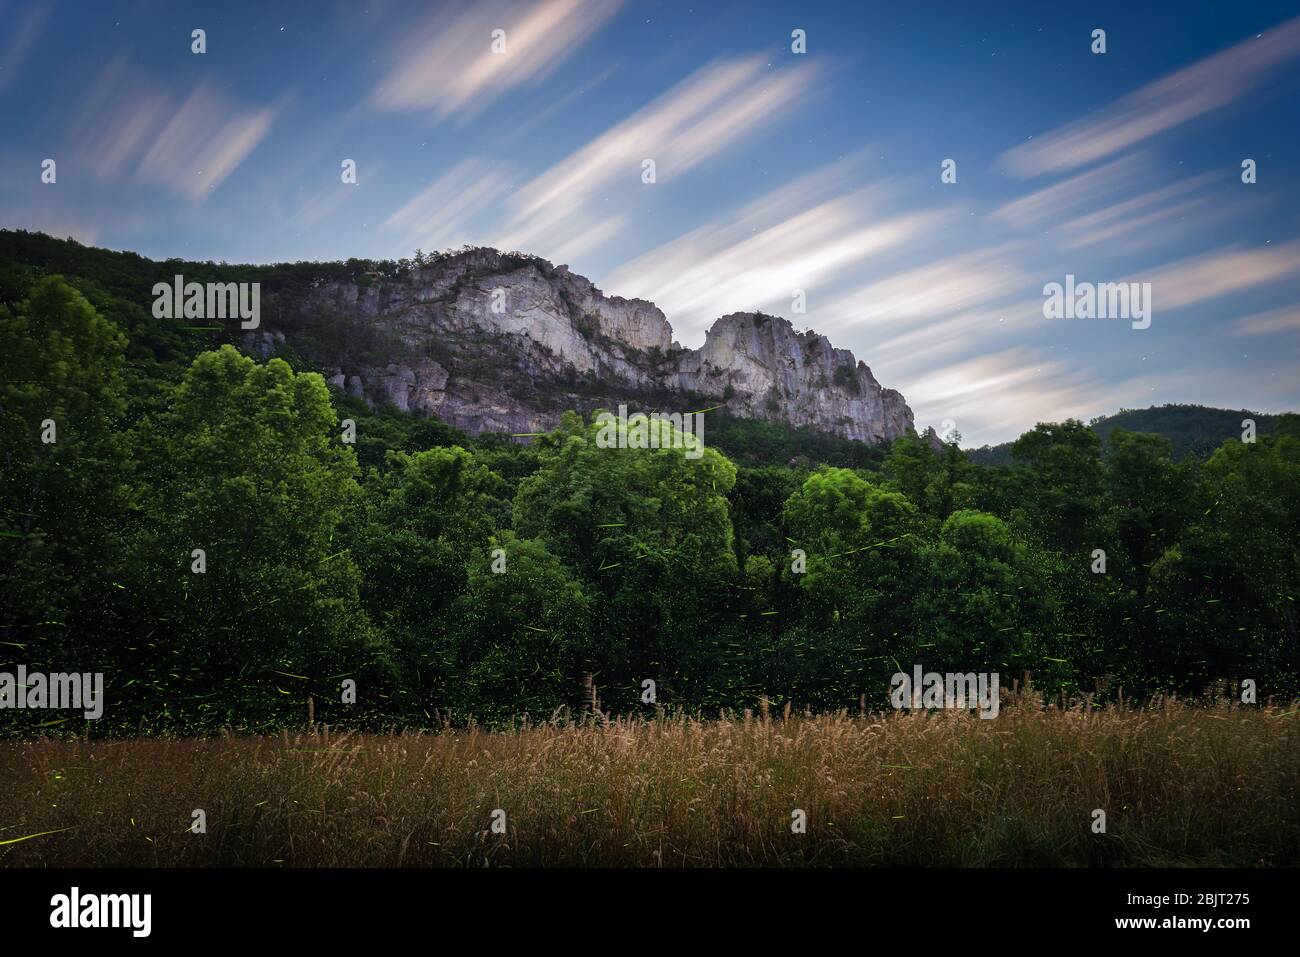 Fireflies fill the edges of the field and forest surrounding Seneca Rocks on an early summer evening in the West Virginia mountains. Stock Photo